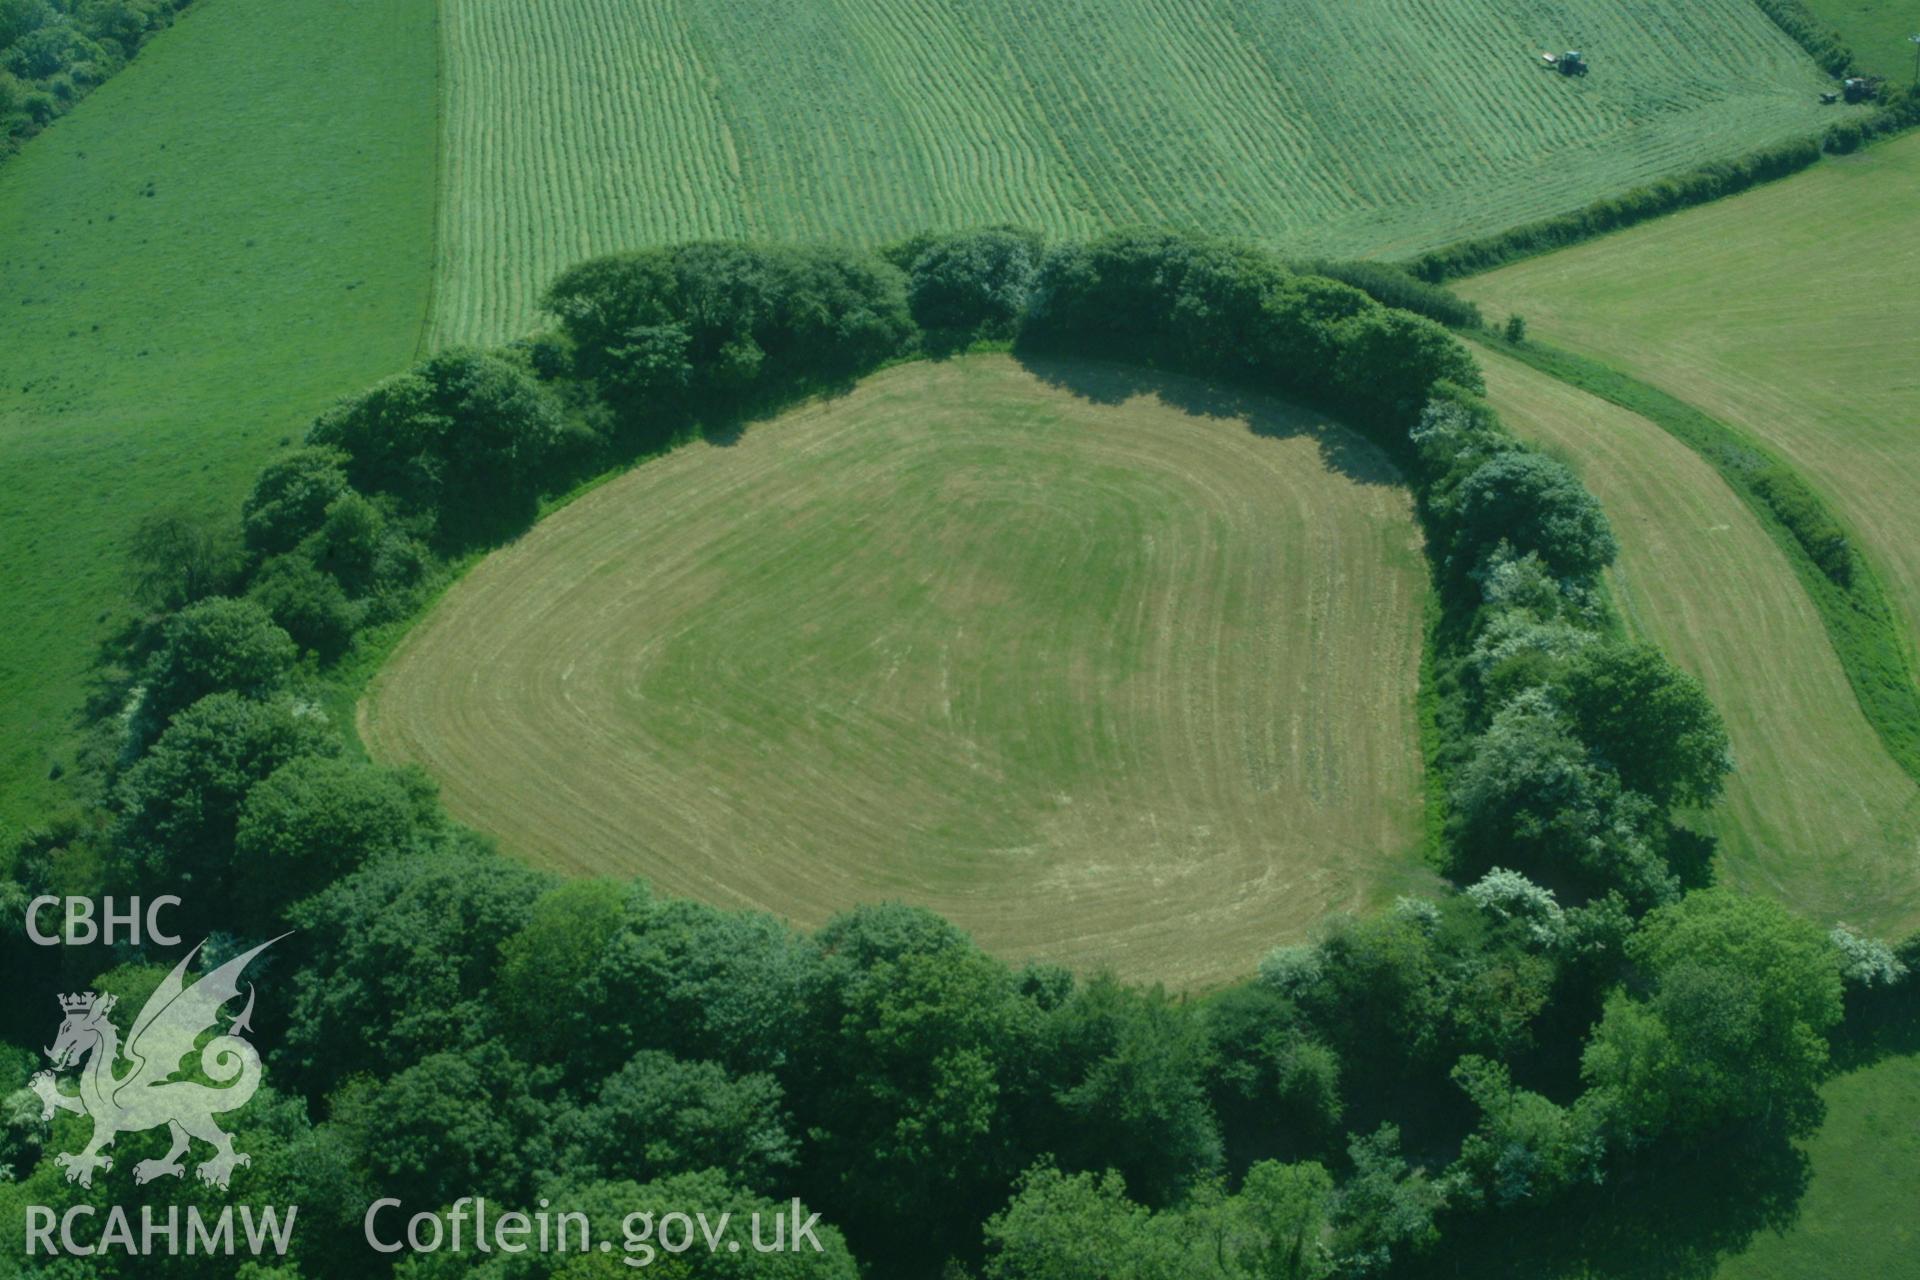 RCAHMW colour oblique aerial photograph of Rudbaxton Rath taken on 24/05/2004 by Toby Driver